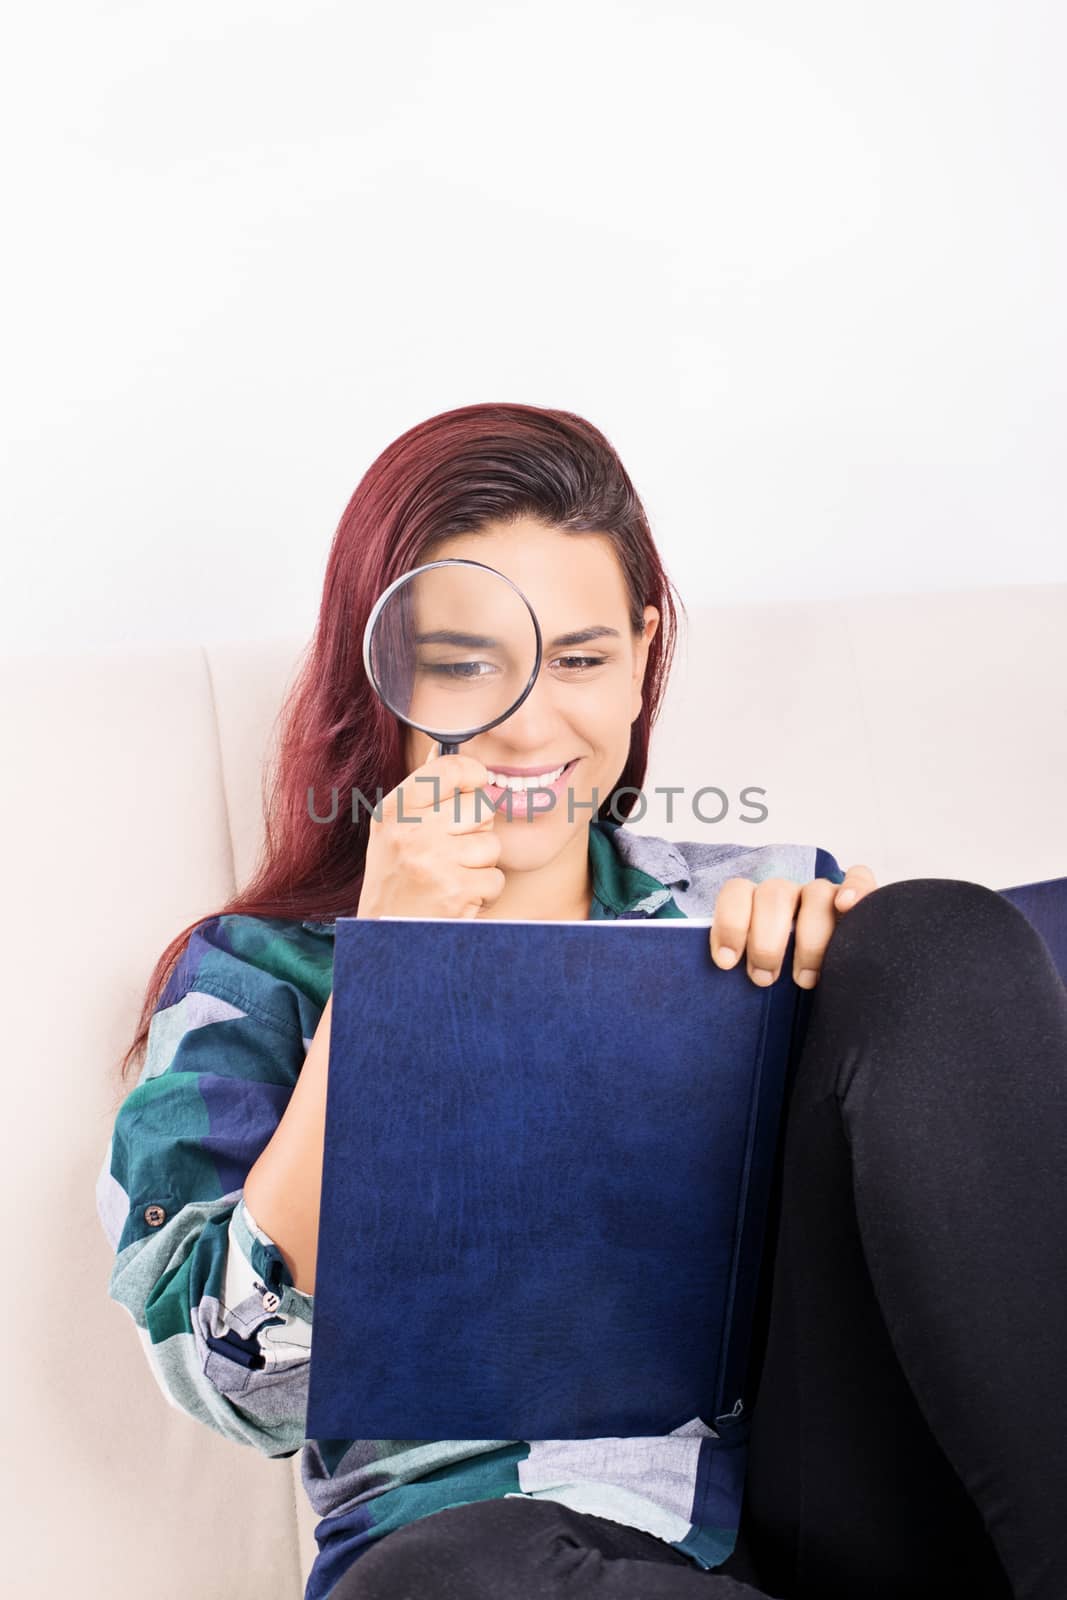 Beautiful young student girl, sitting on a couch looking at an open book through a magnifying glass.